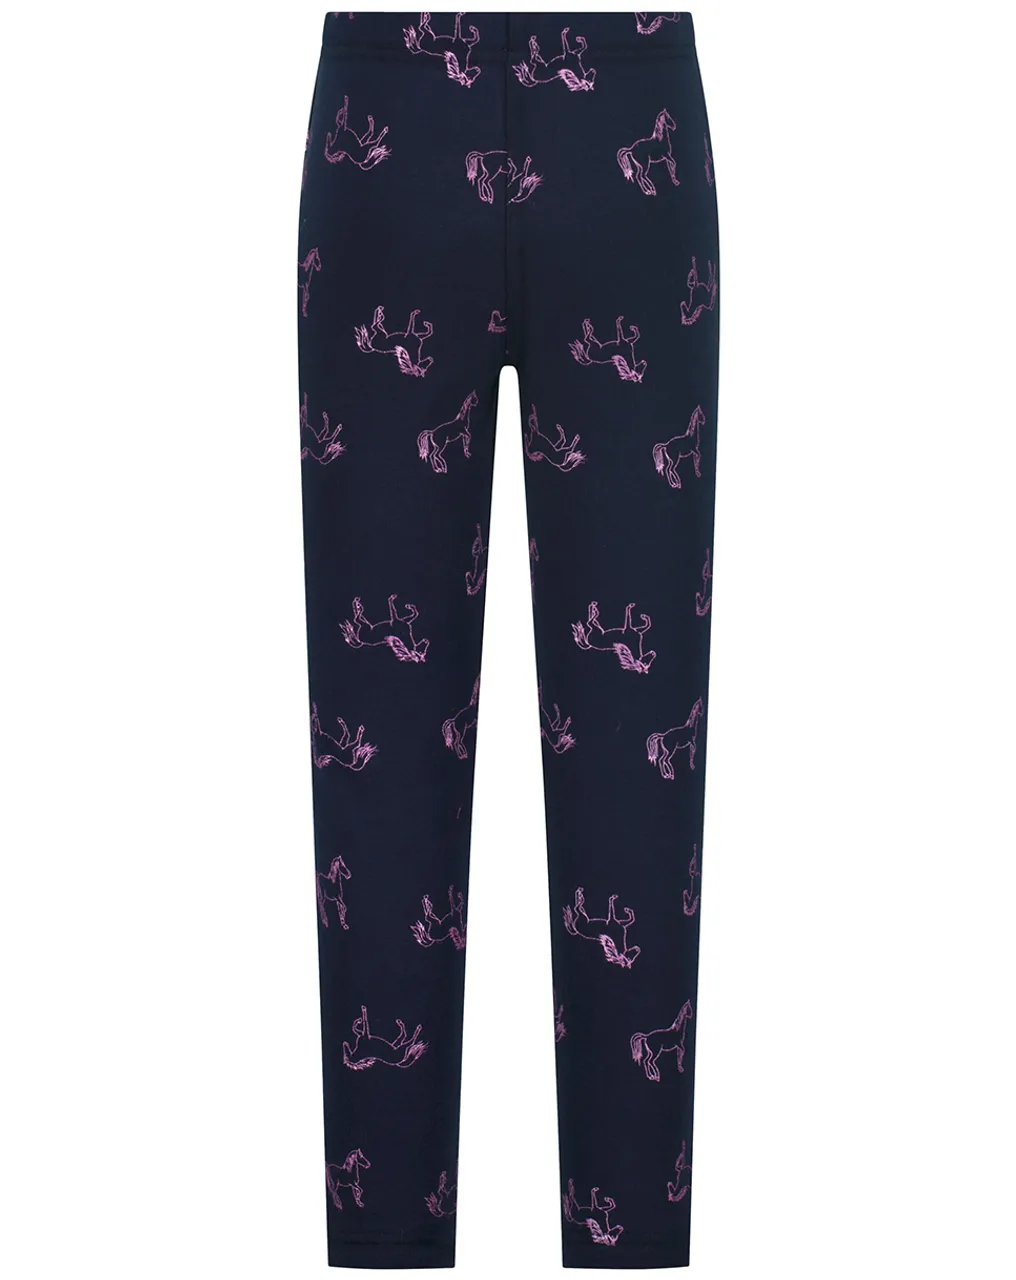 Thermo-Leggings HORSES OUTLINES in navy